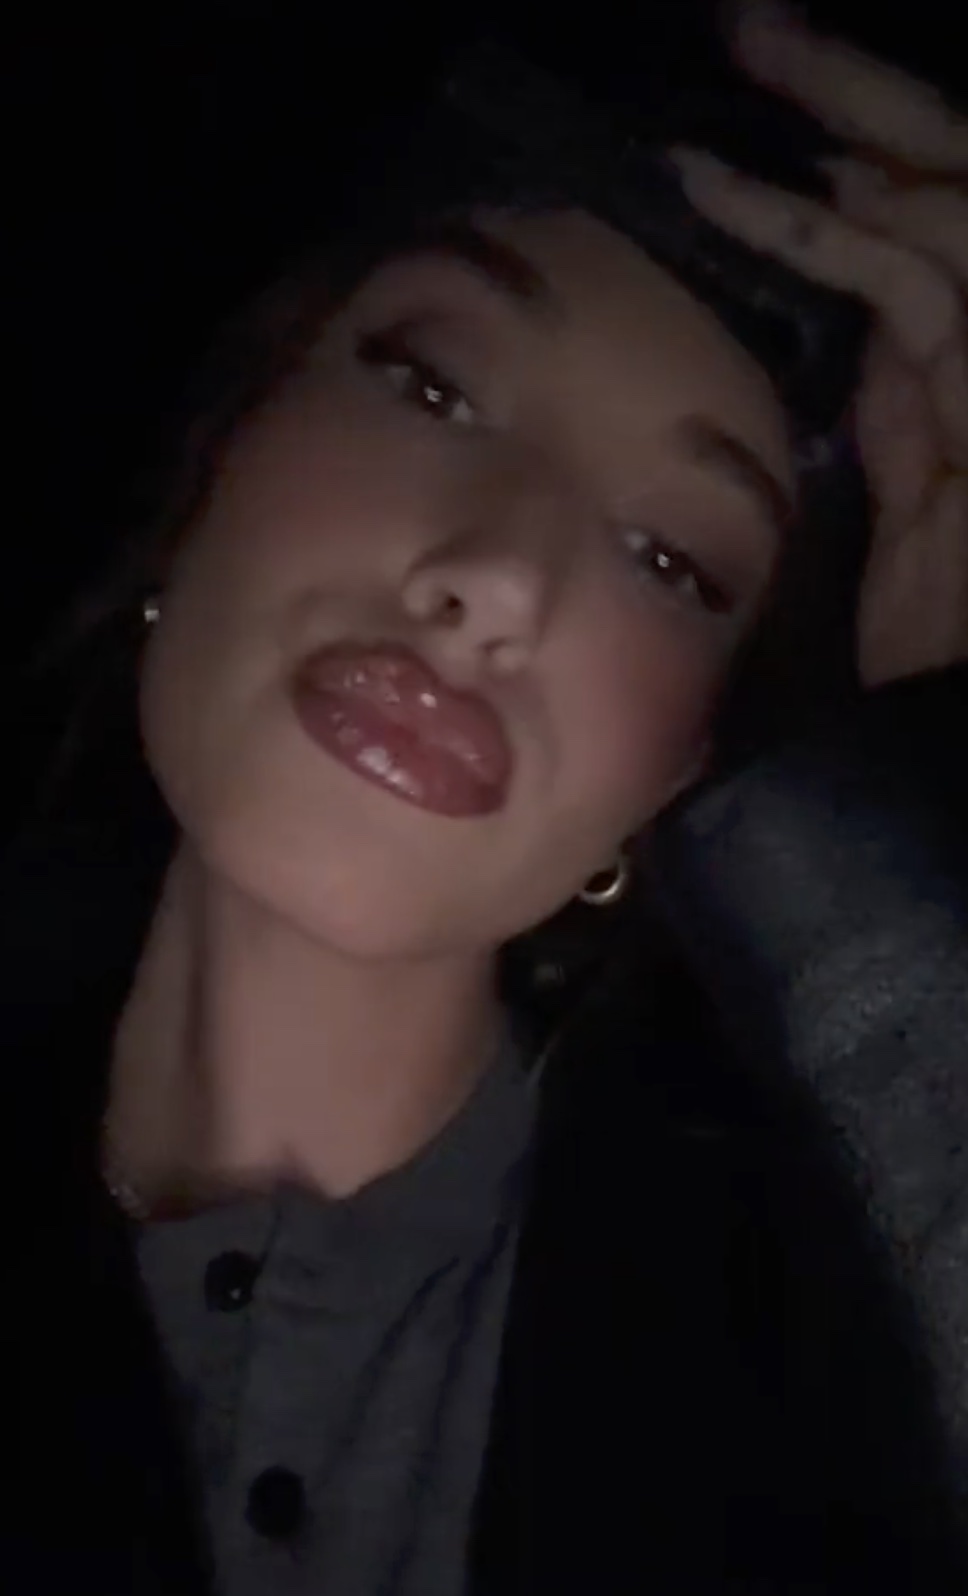 Suspicions began to arise after Hailey shared a recent video on TikTok